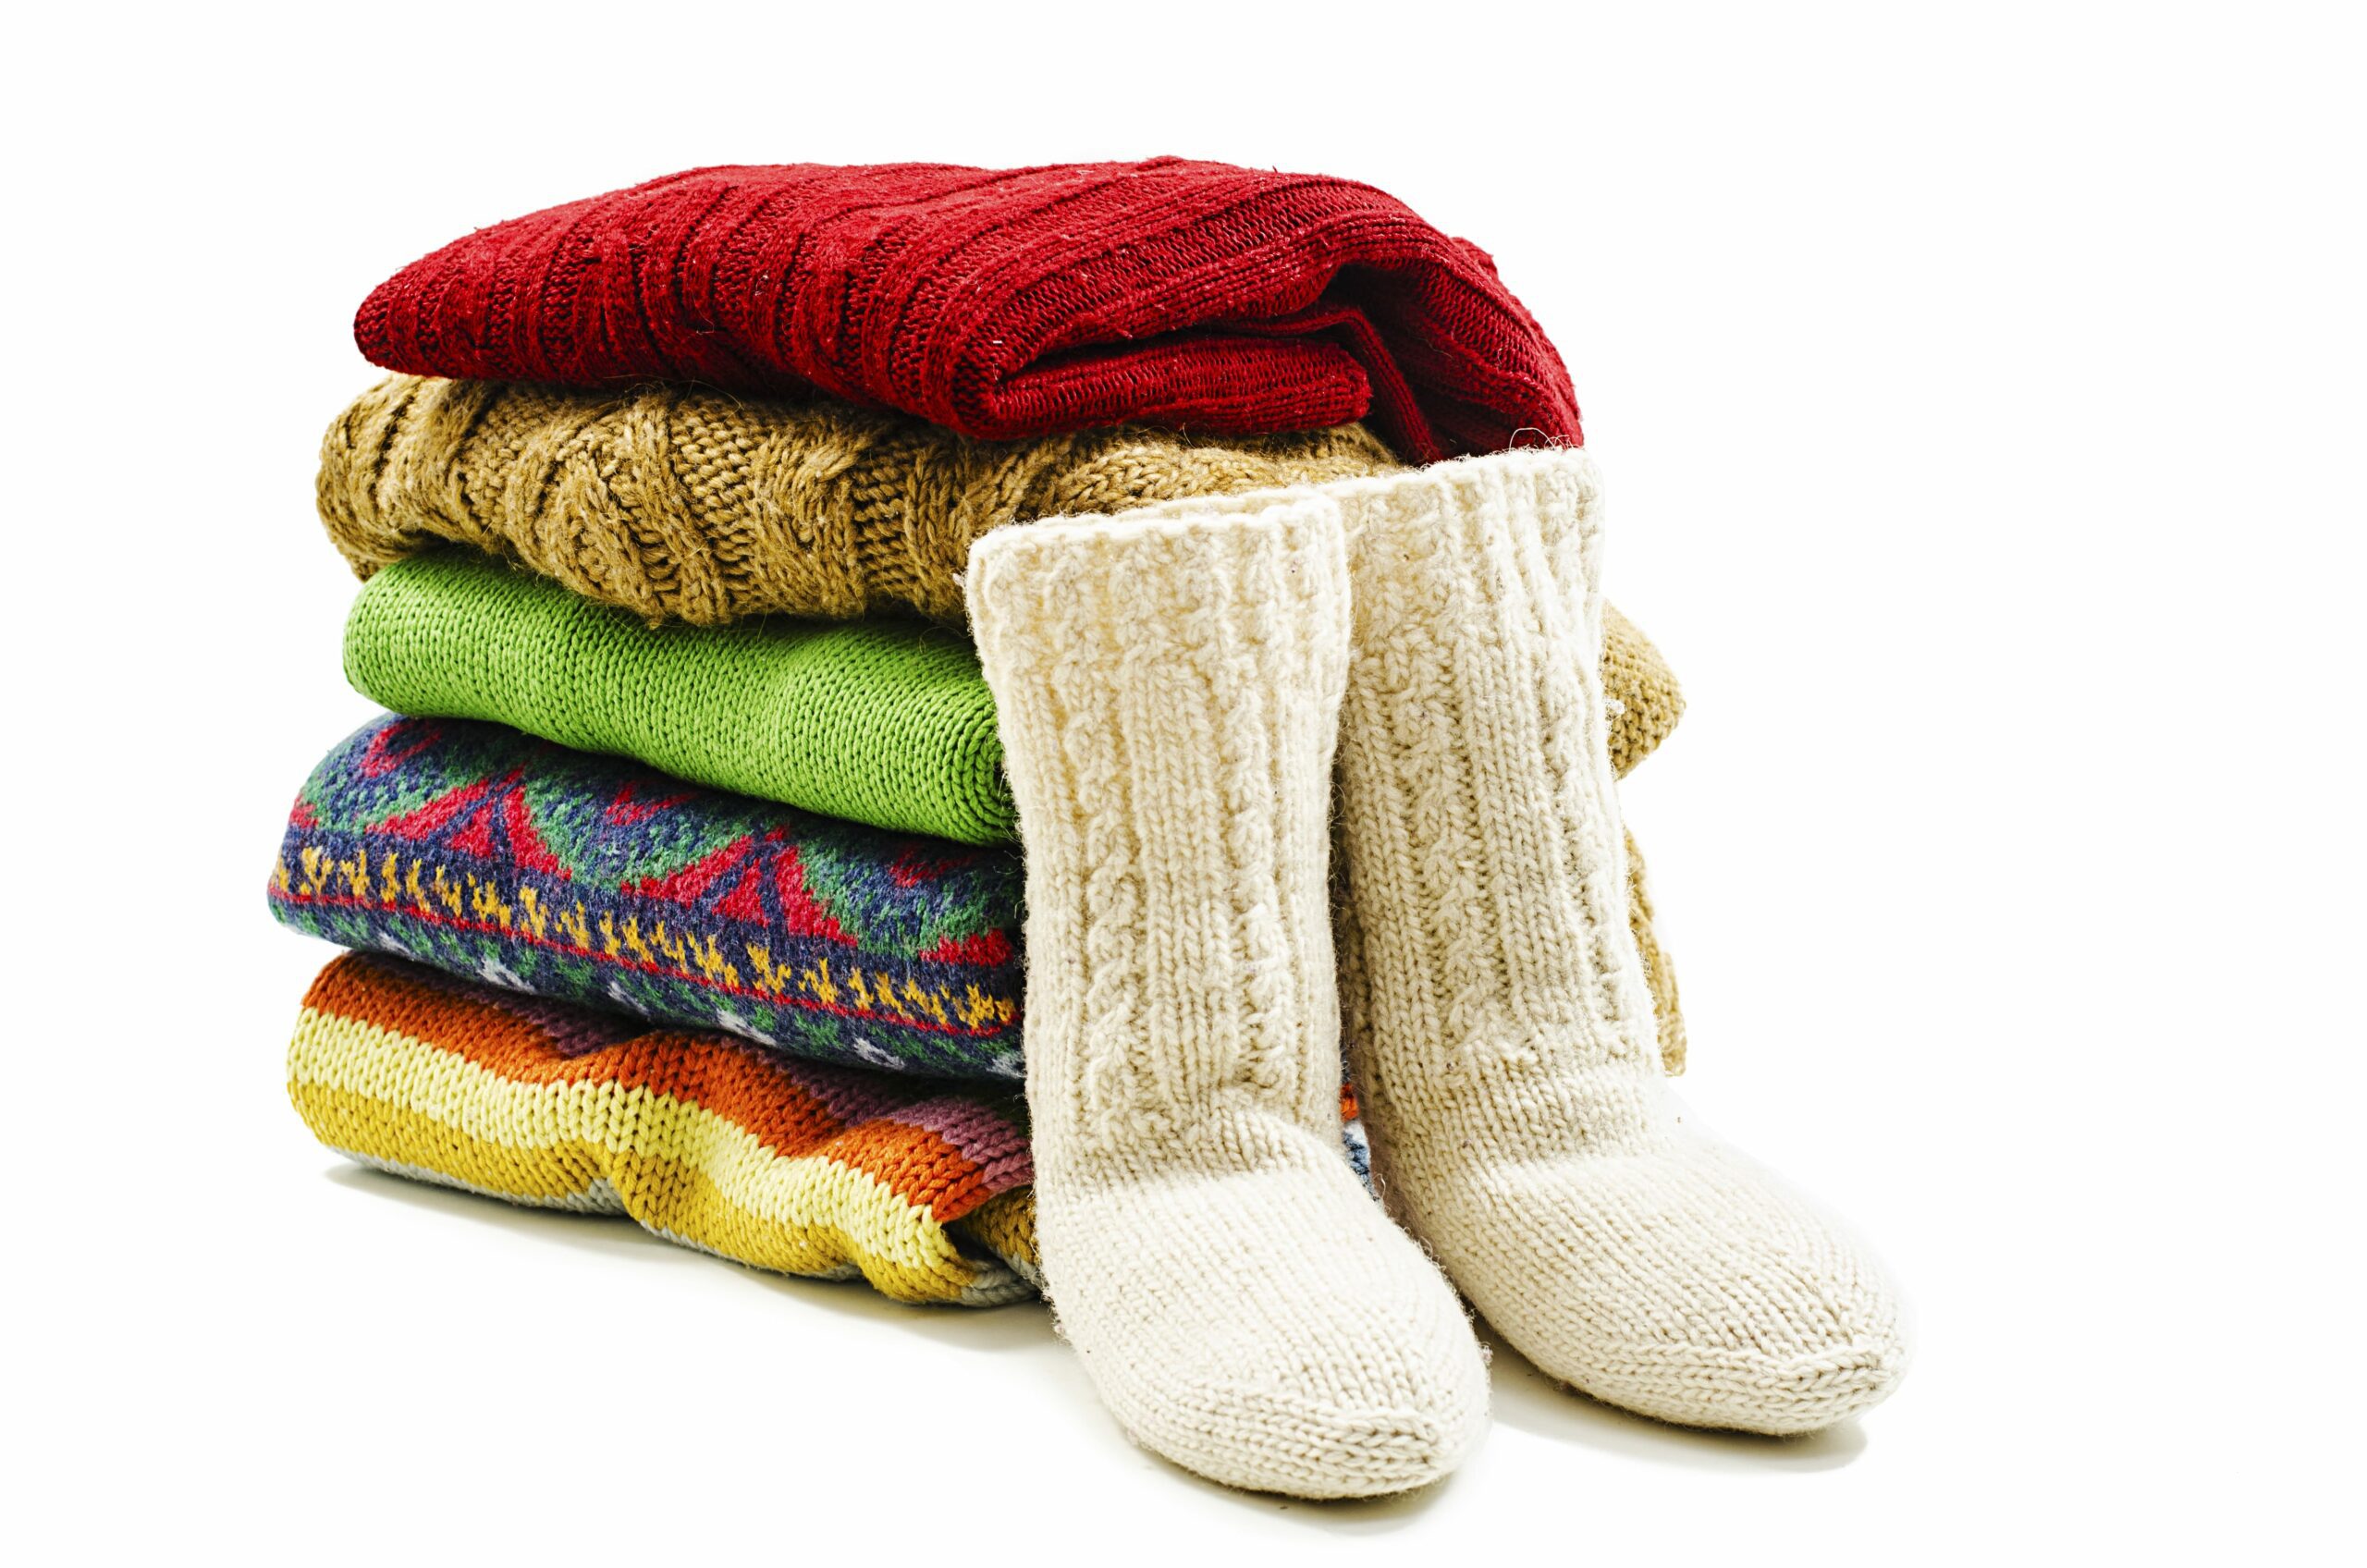 How to Store Winter Clothes Correctly: Everything to Know